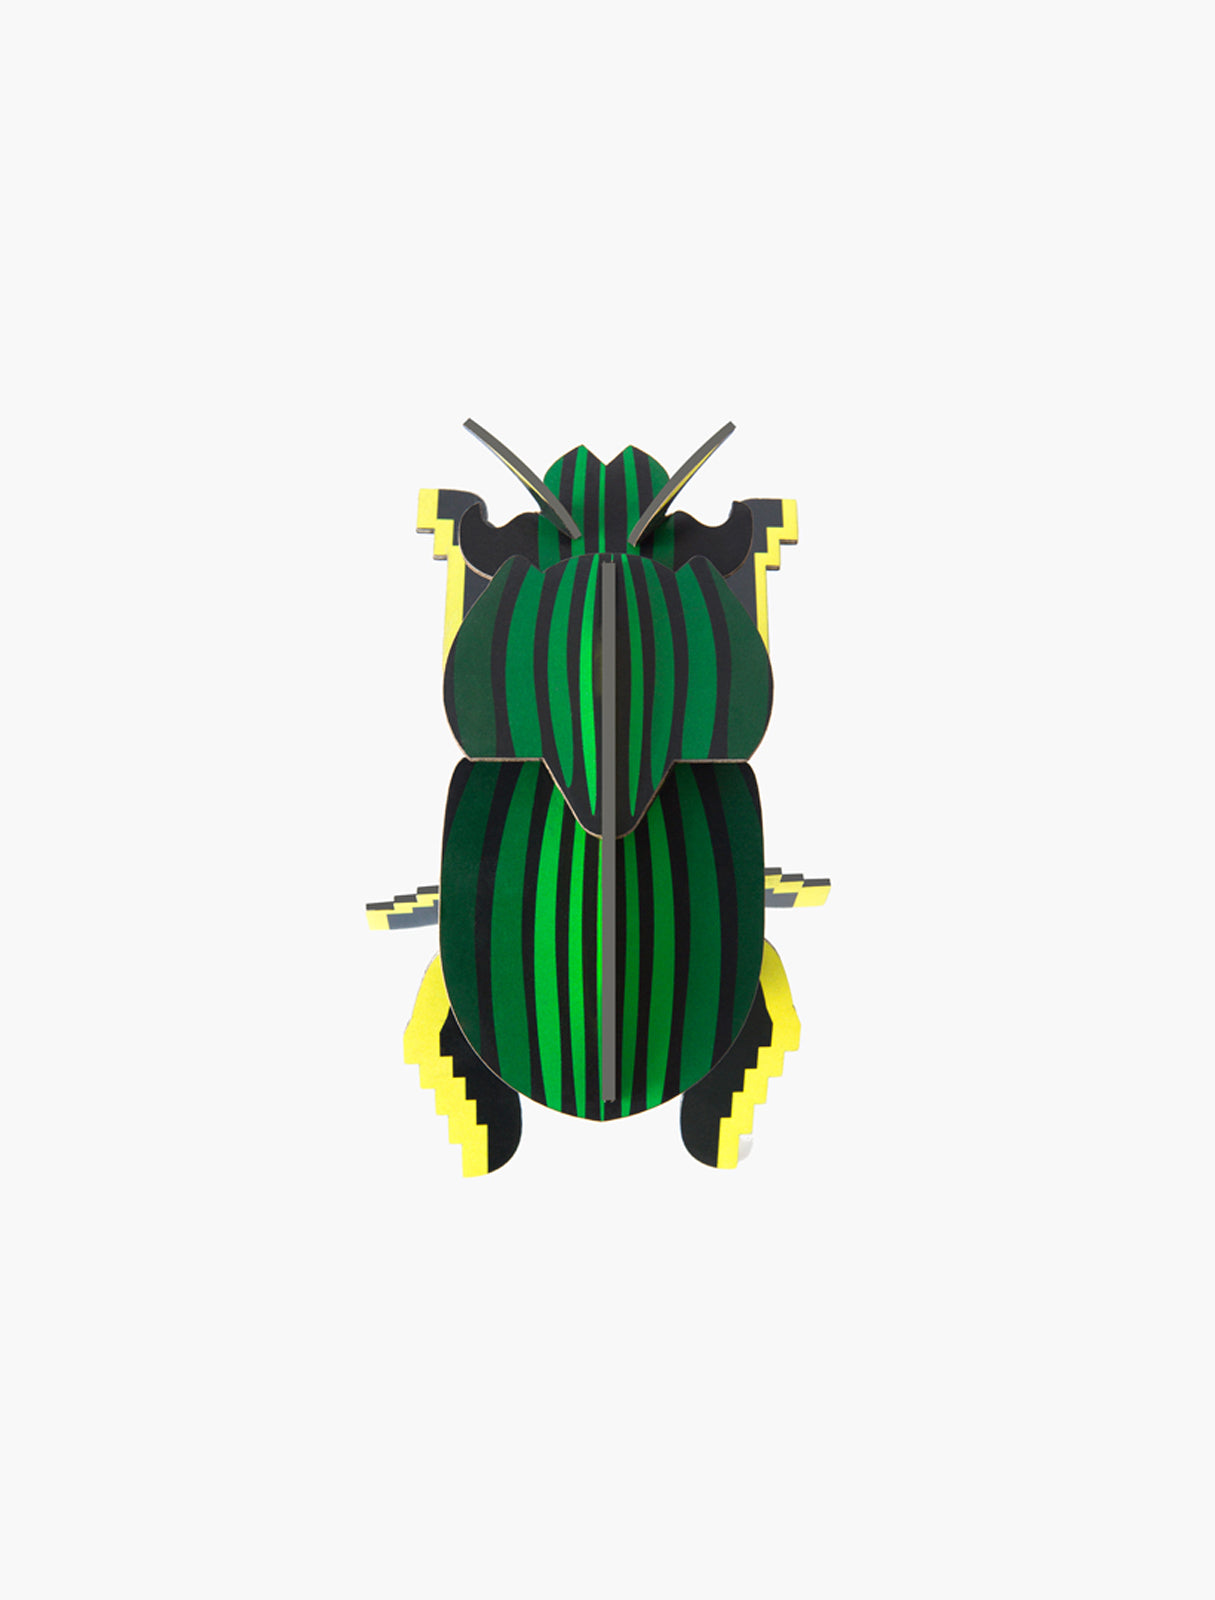 Studio ROOF Insects - Scarab Beetle